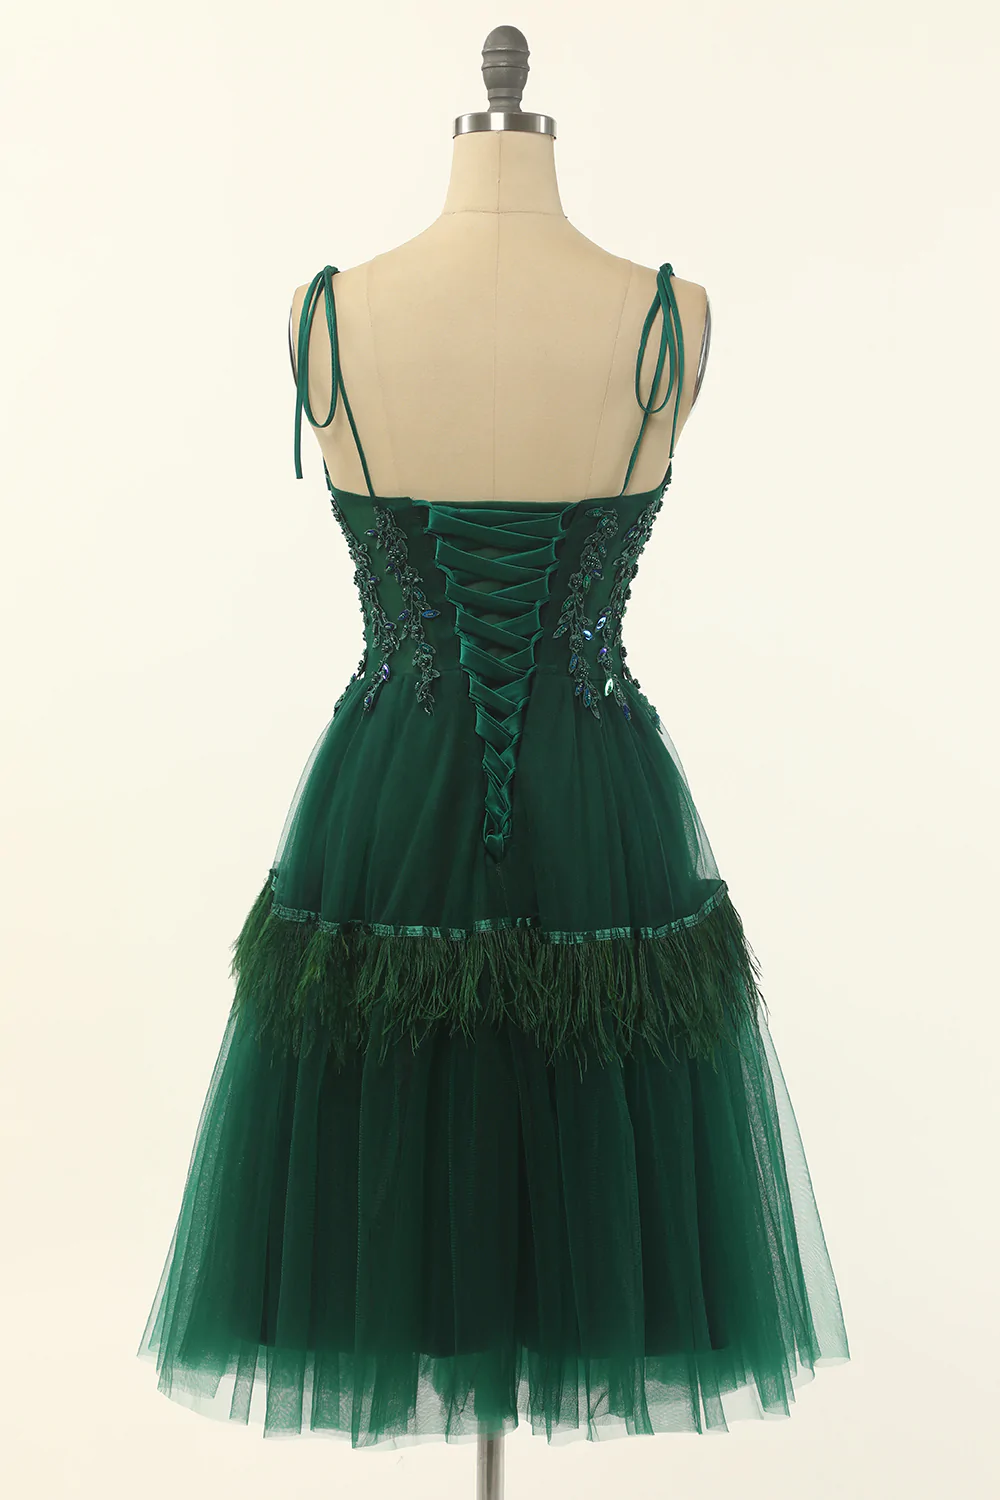 A-Line Green Tulle Above Knee Length Homecoming Dress,Party Dress Y1703